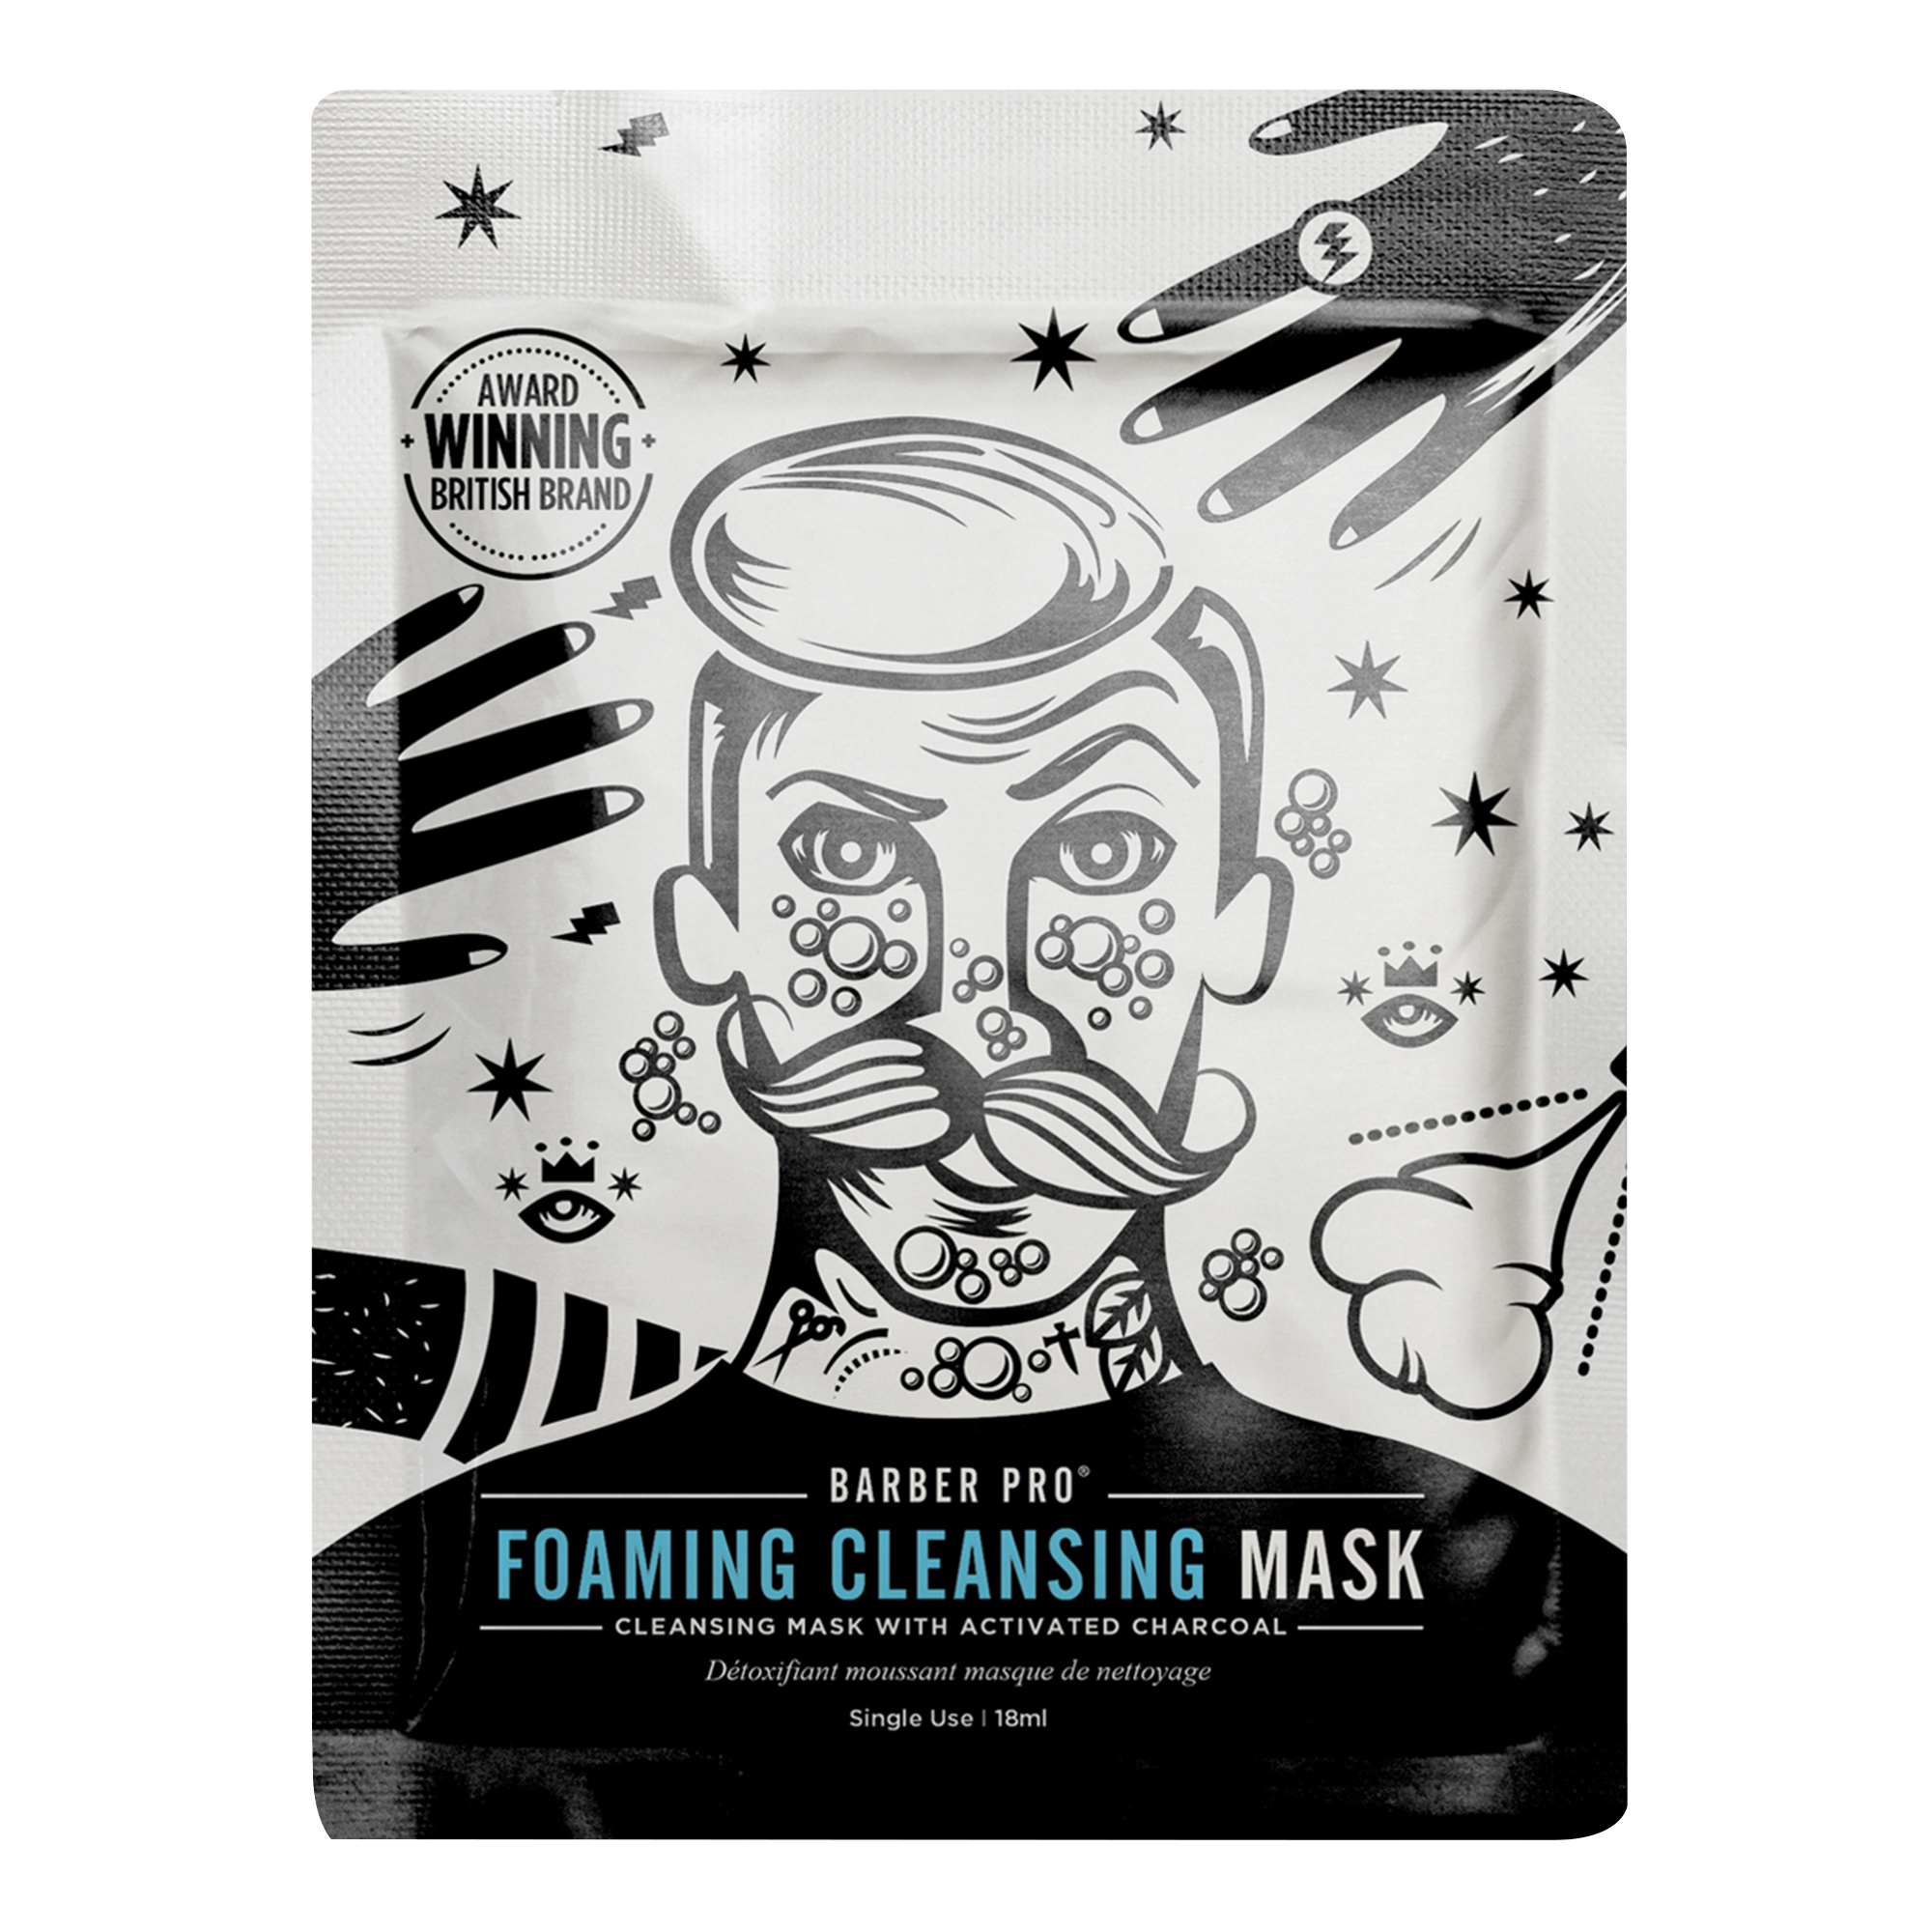 FOAMING CLEANSING MASK